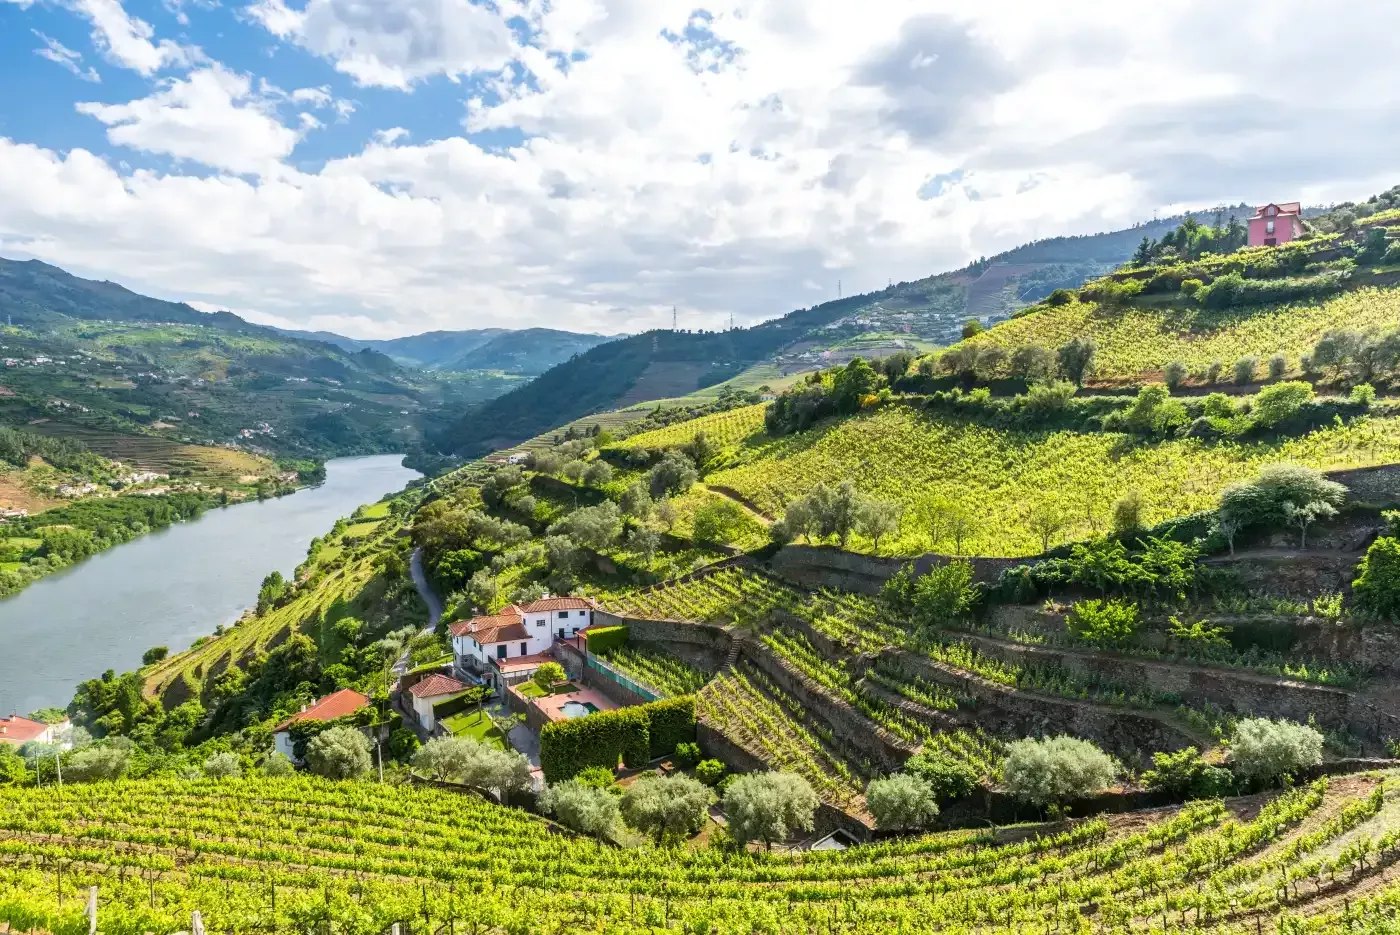 A photo illustrating Douro Valley